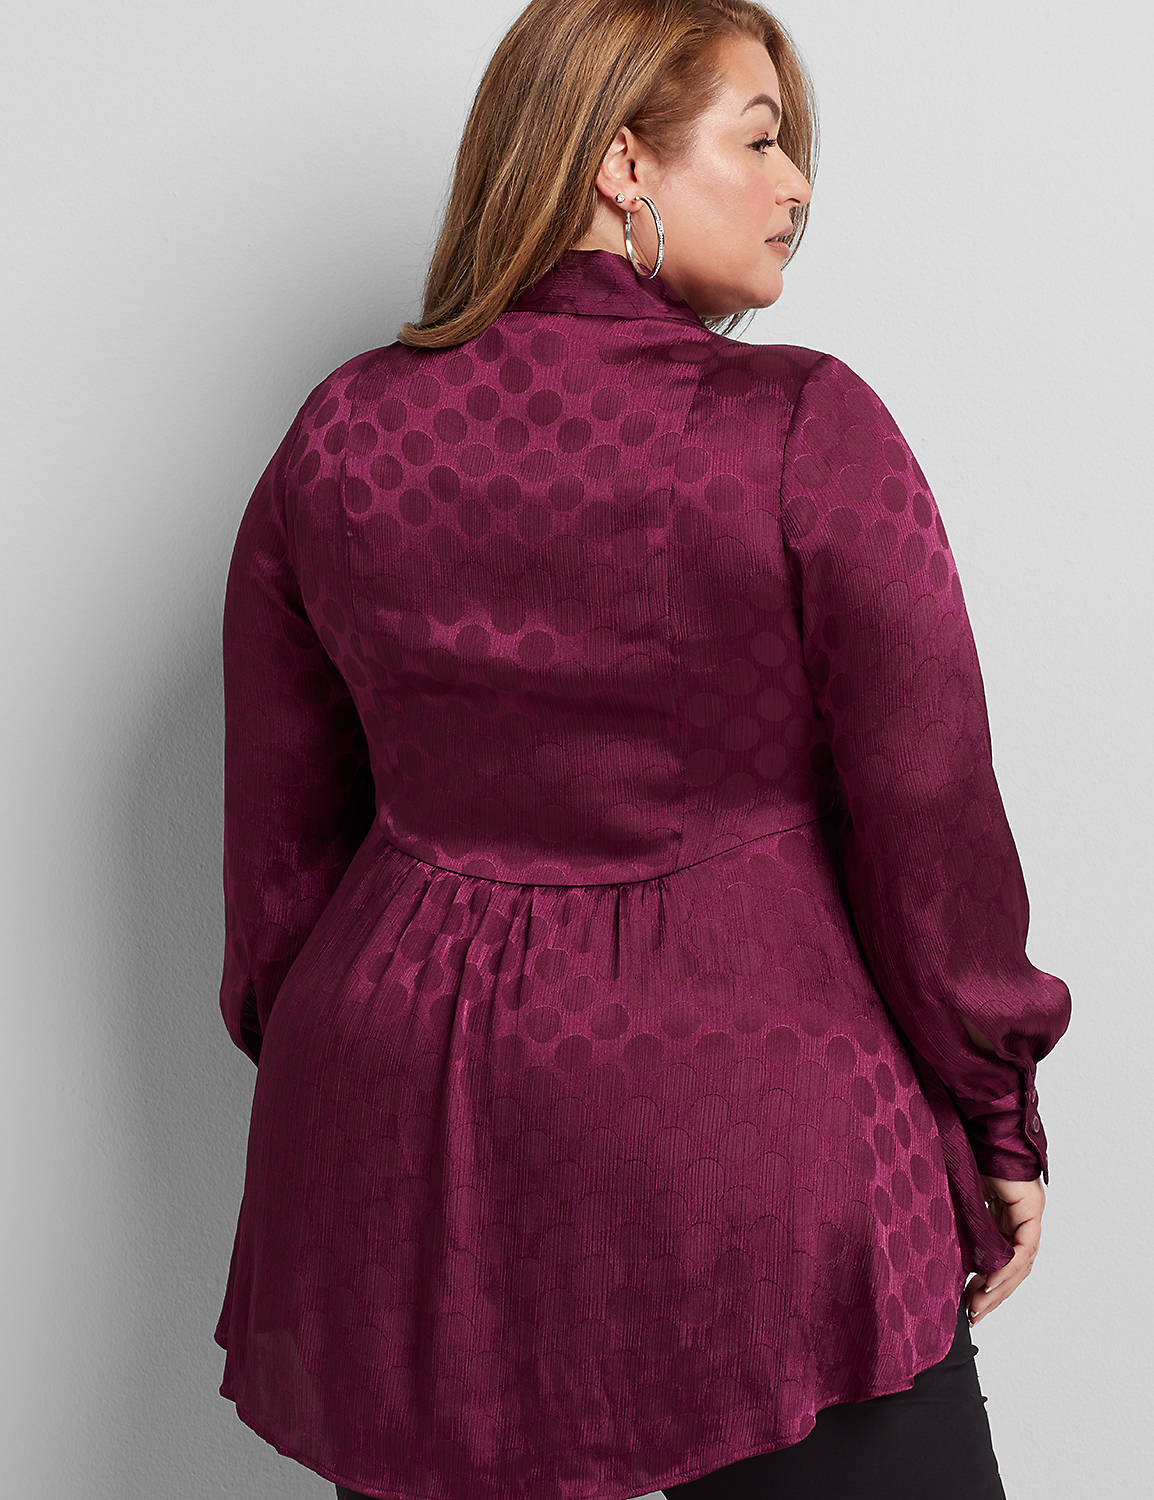 Long Sleeve Button Front High Low Tunic Novelty Jacquard Blouse 1114689:PANTONE Pickled Beet:14 Product Image 2